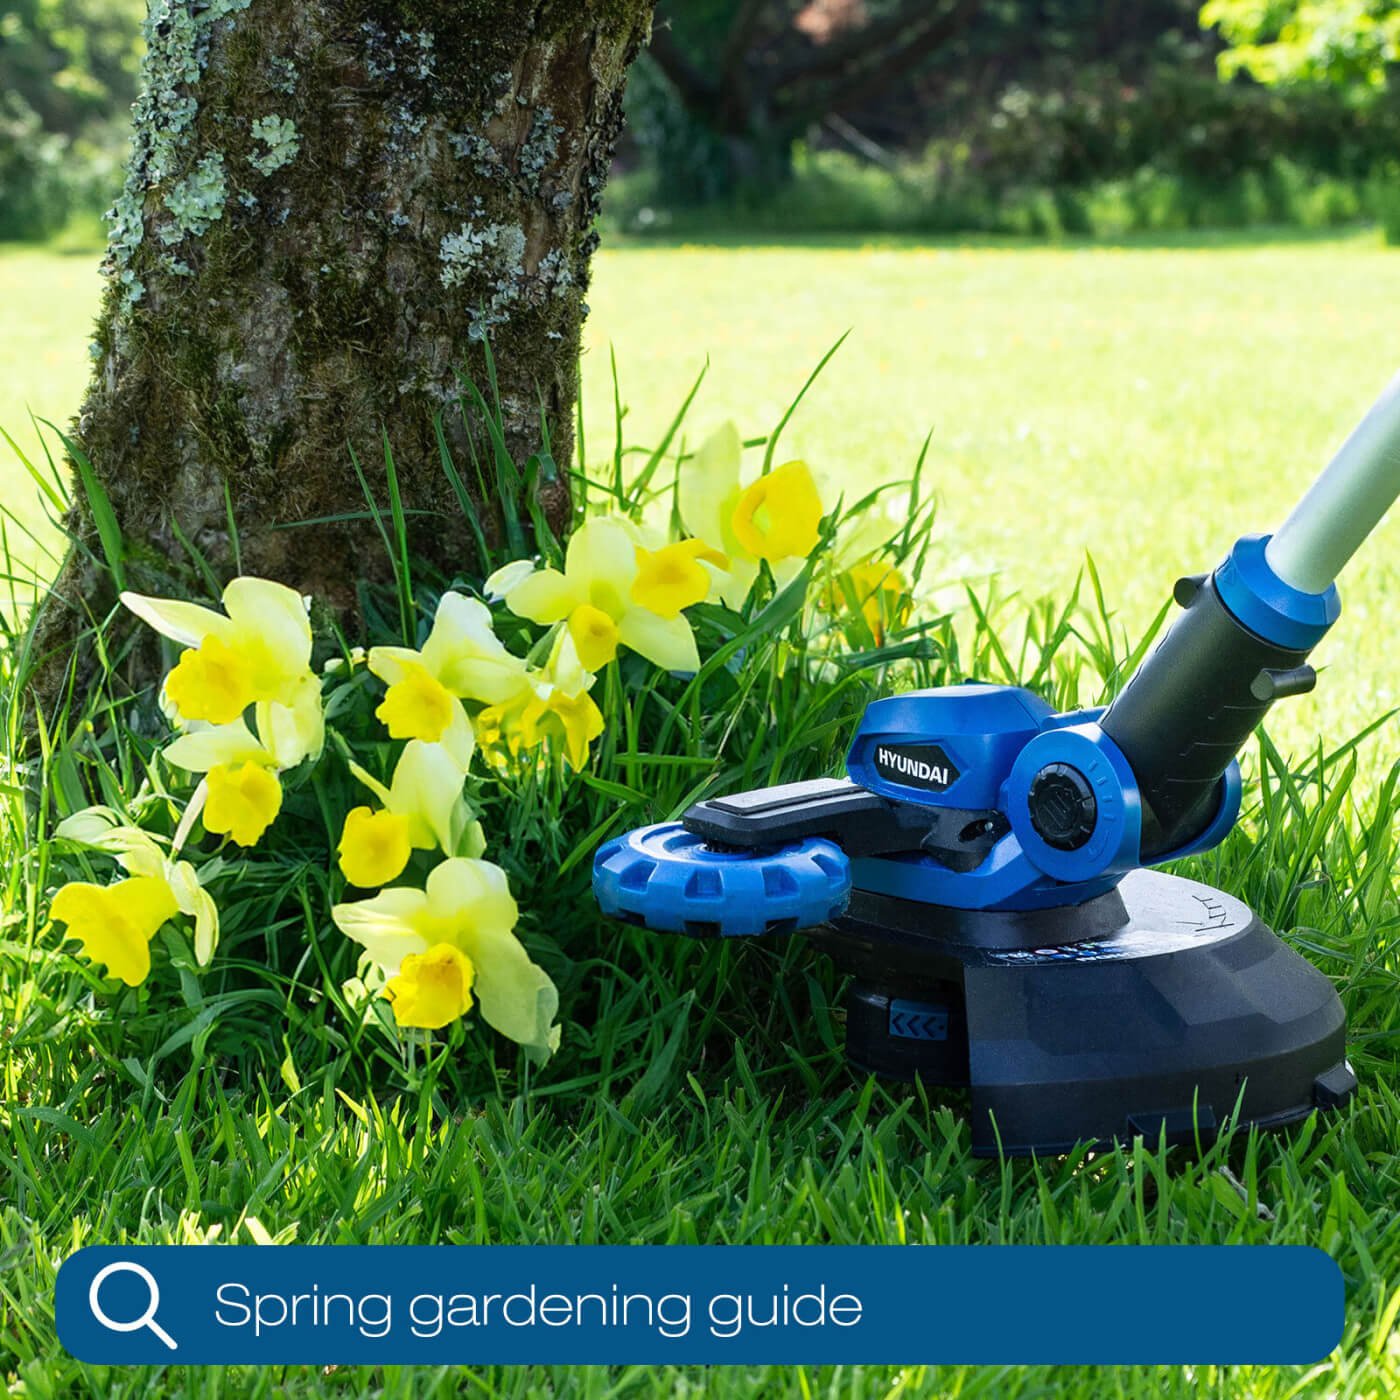 Spring Gardening: Preparing Your Garden for the New Season with Hyundai Power Products